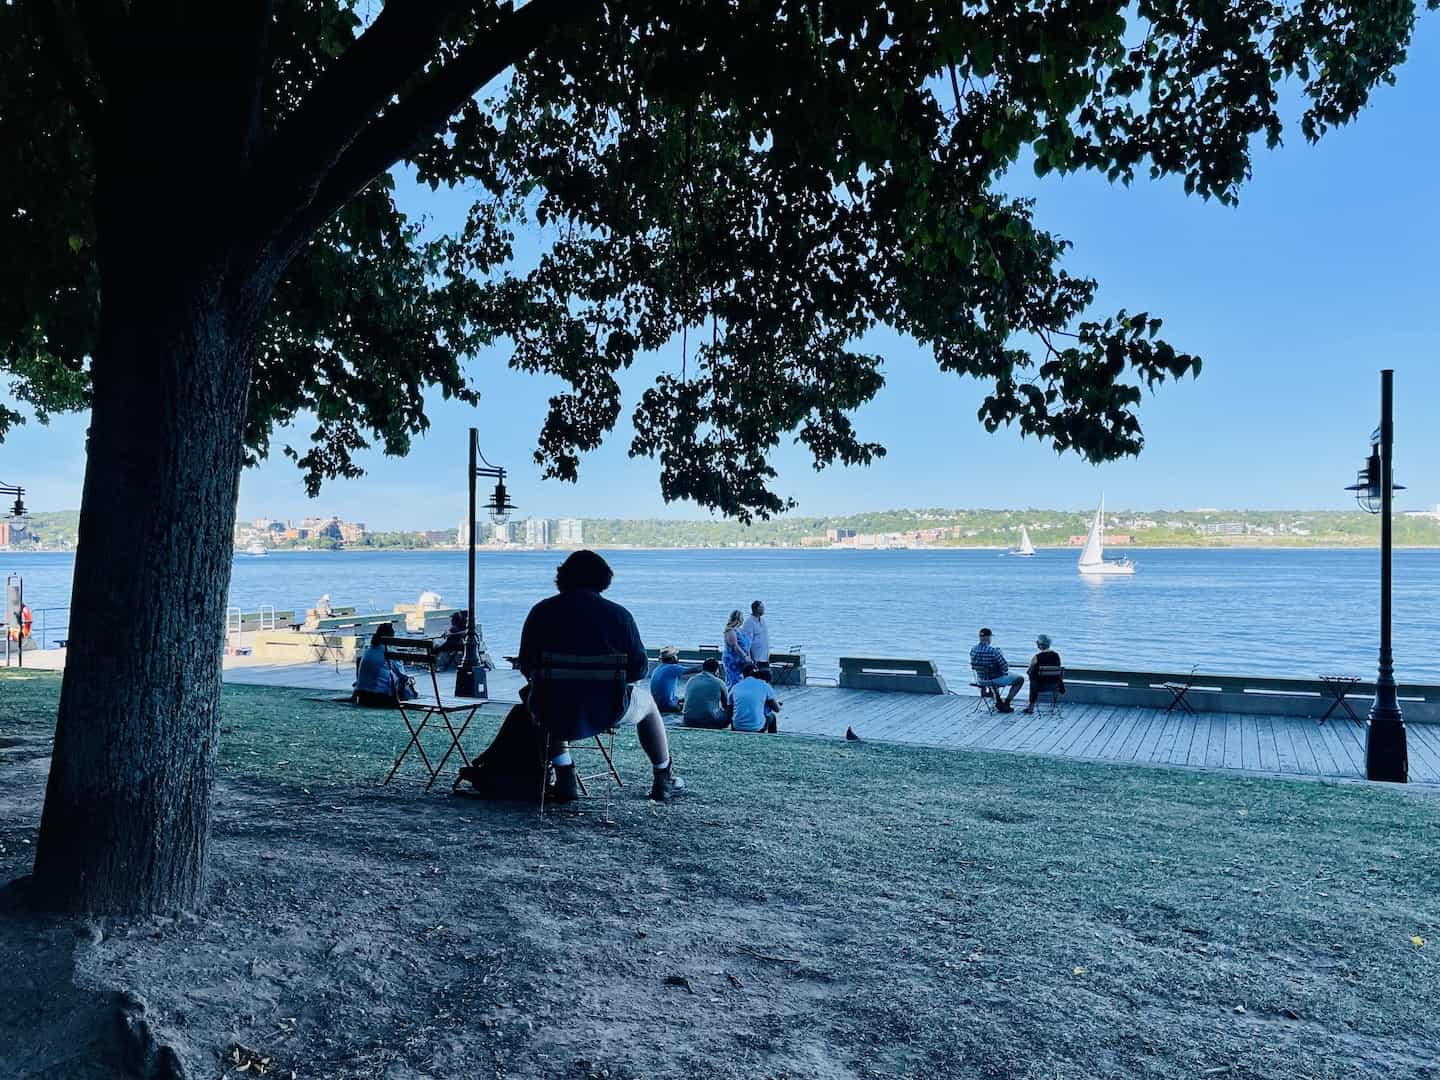 Under a large shady tree, people sit near the Halifax waterfront watching boat go by in the harbor.